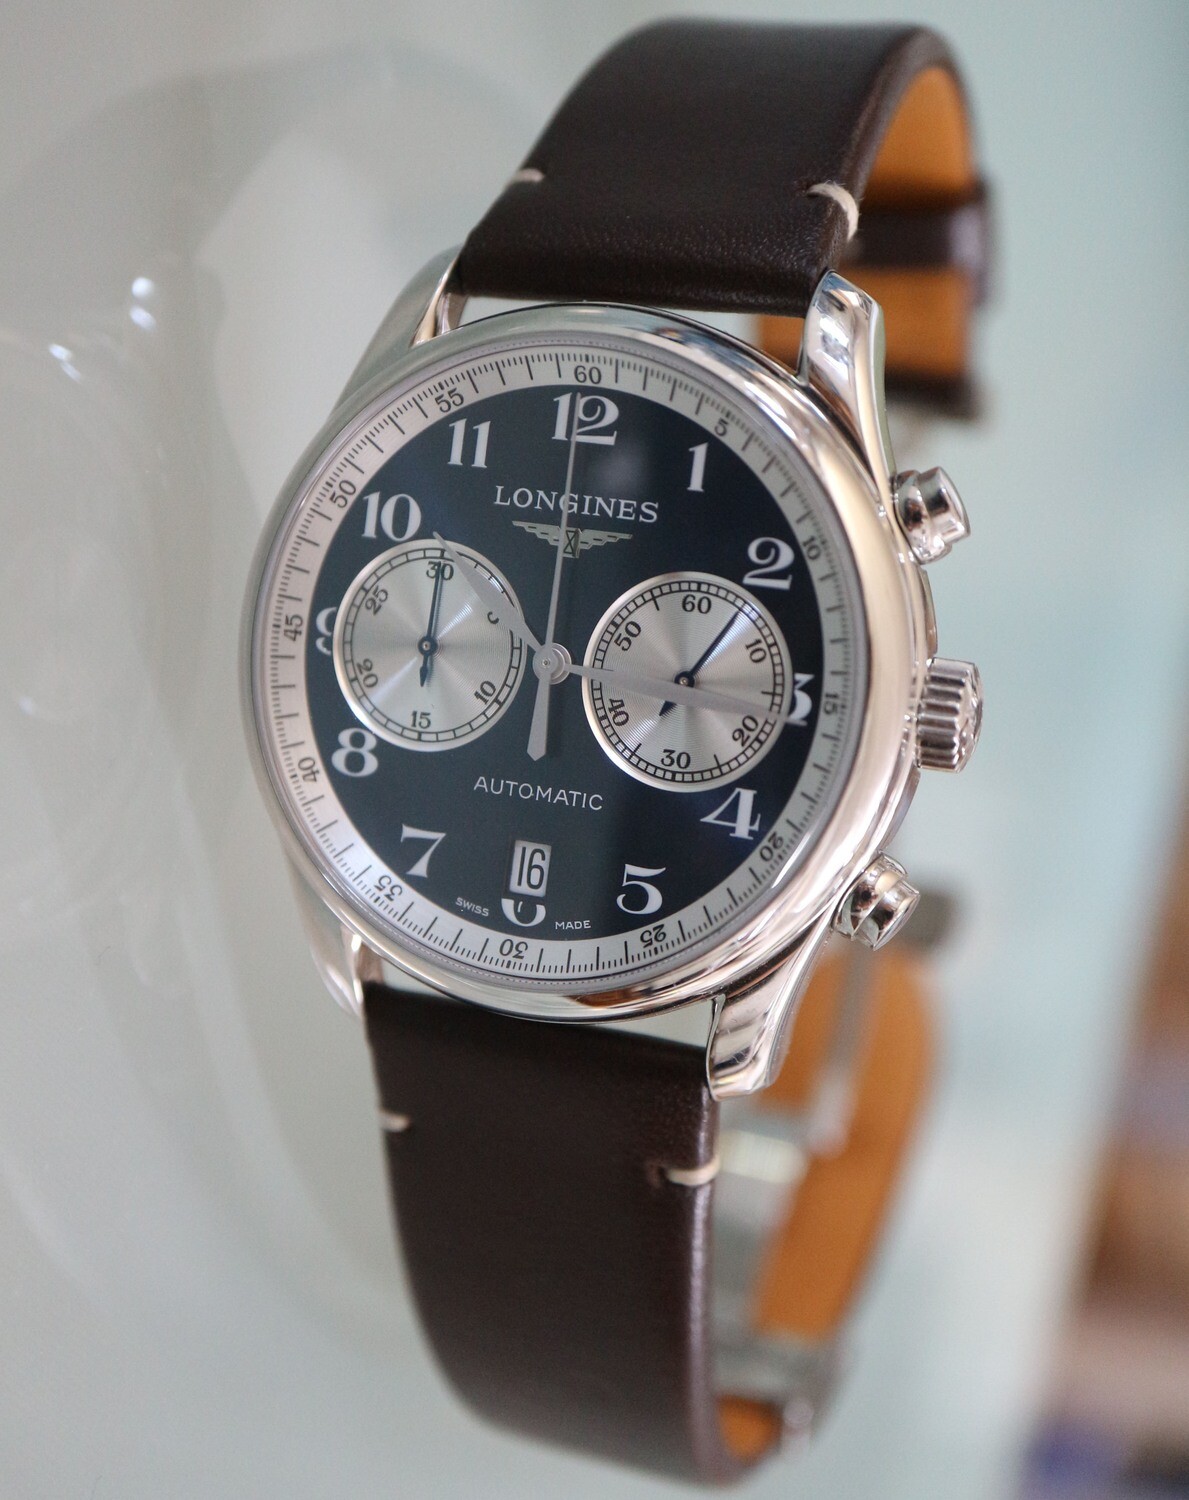 Longines Chronograph, limitierte Master Collection, 2019